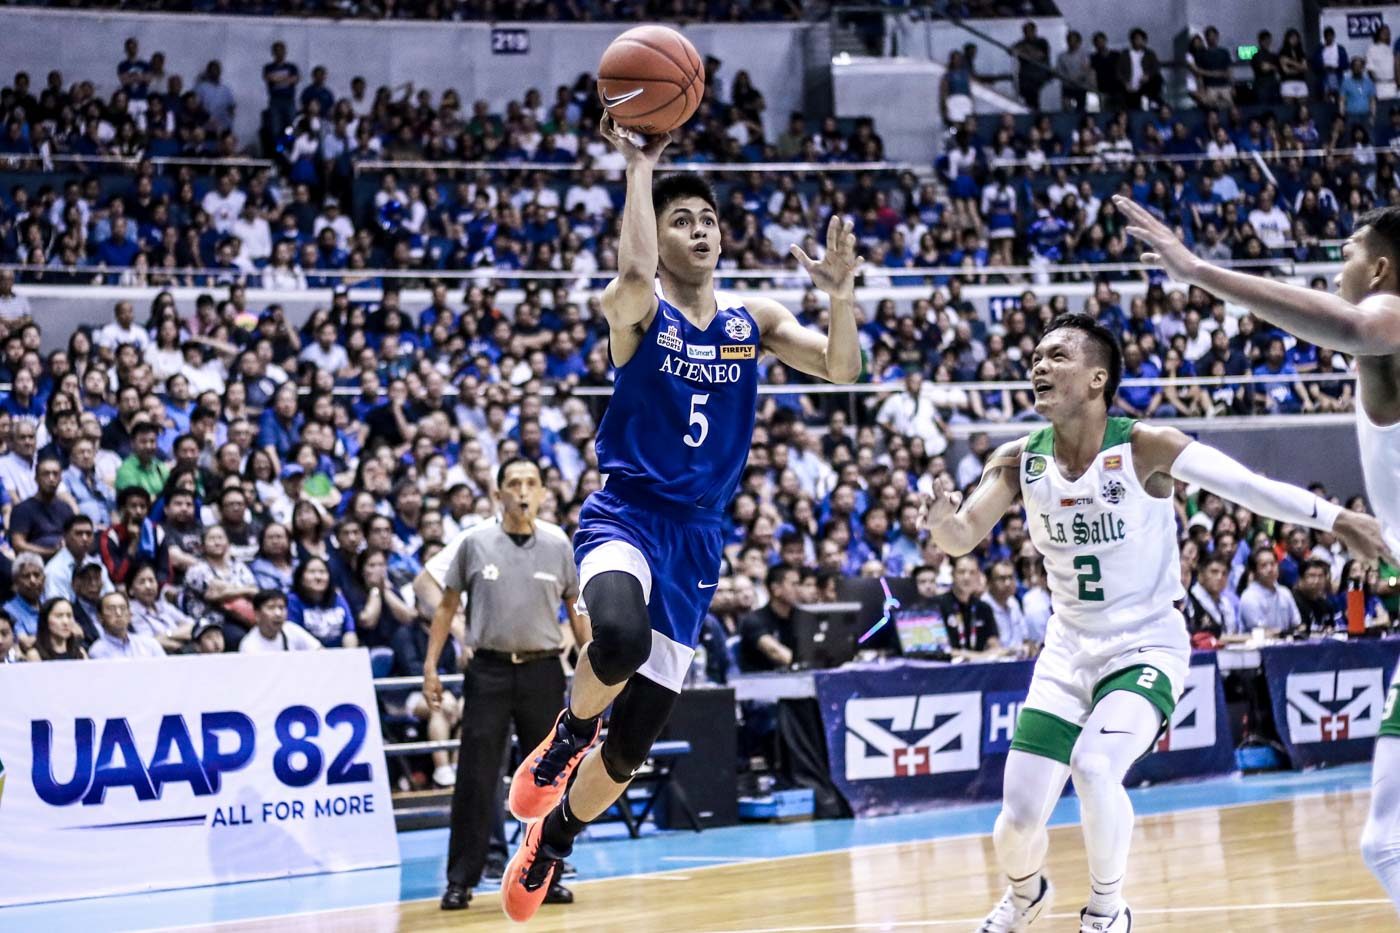 RIVALRY. The Araneta Coliseum has witnessed matches between Ateneo and La Salle for many seasons of the UAAP. File photo by Michael Gatpandan/Rappler 